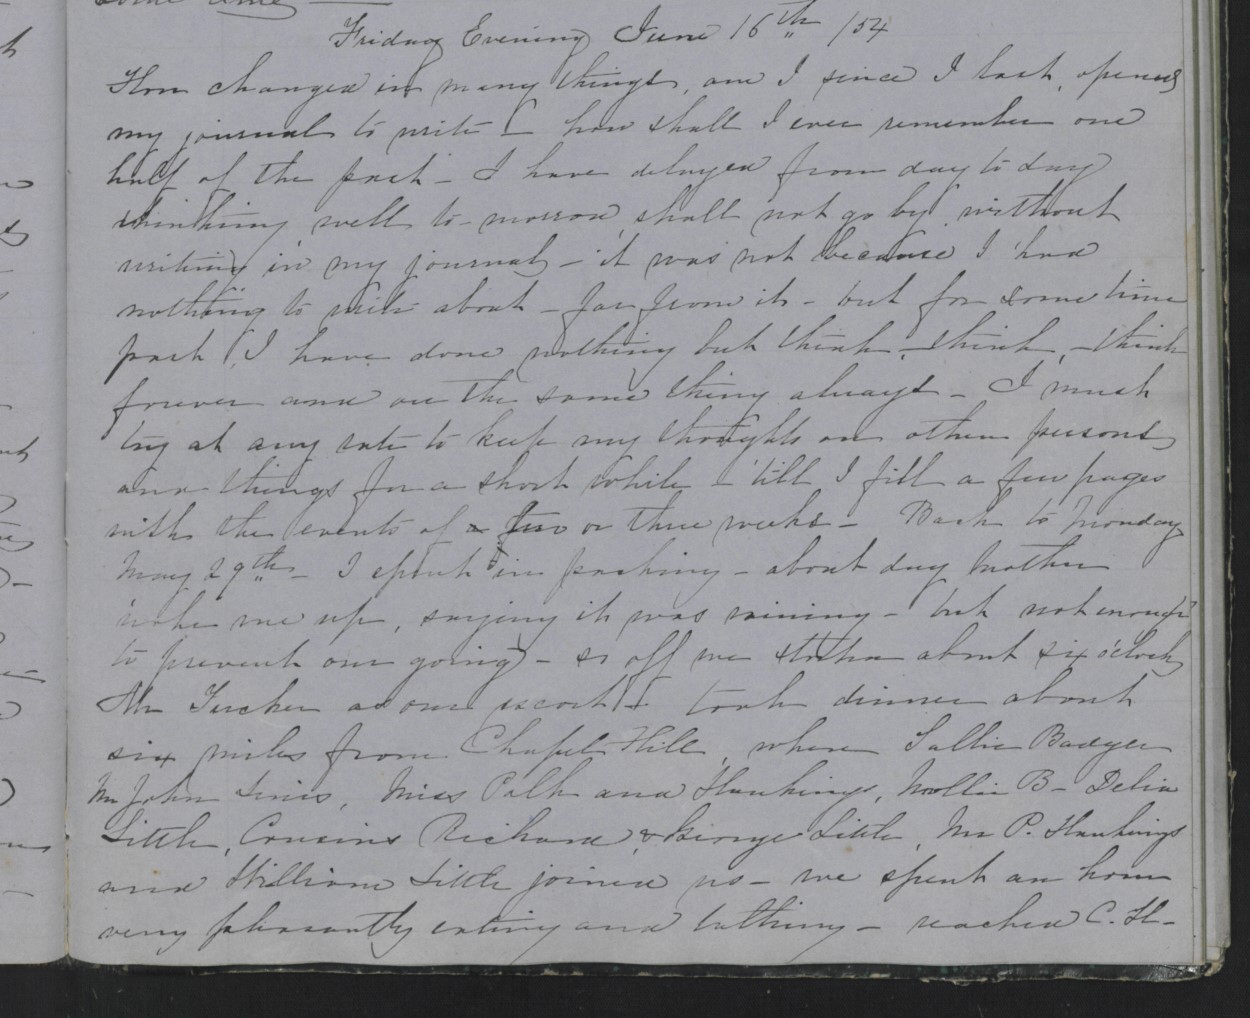 Diary Entry from Margaret Eliza Cotten, 16 June 1854, Page 1